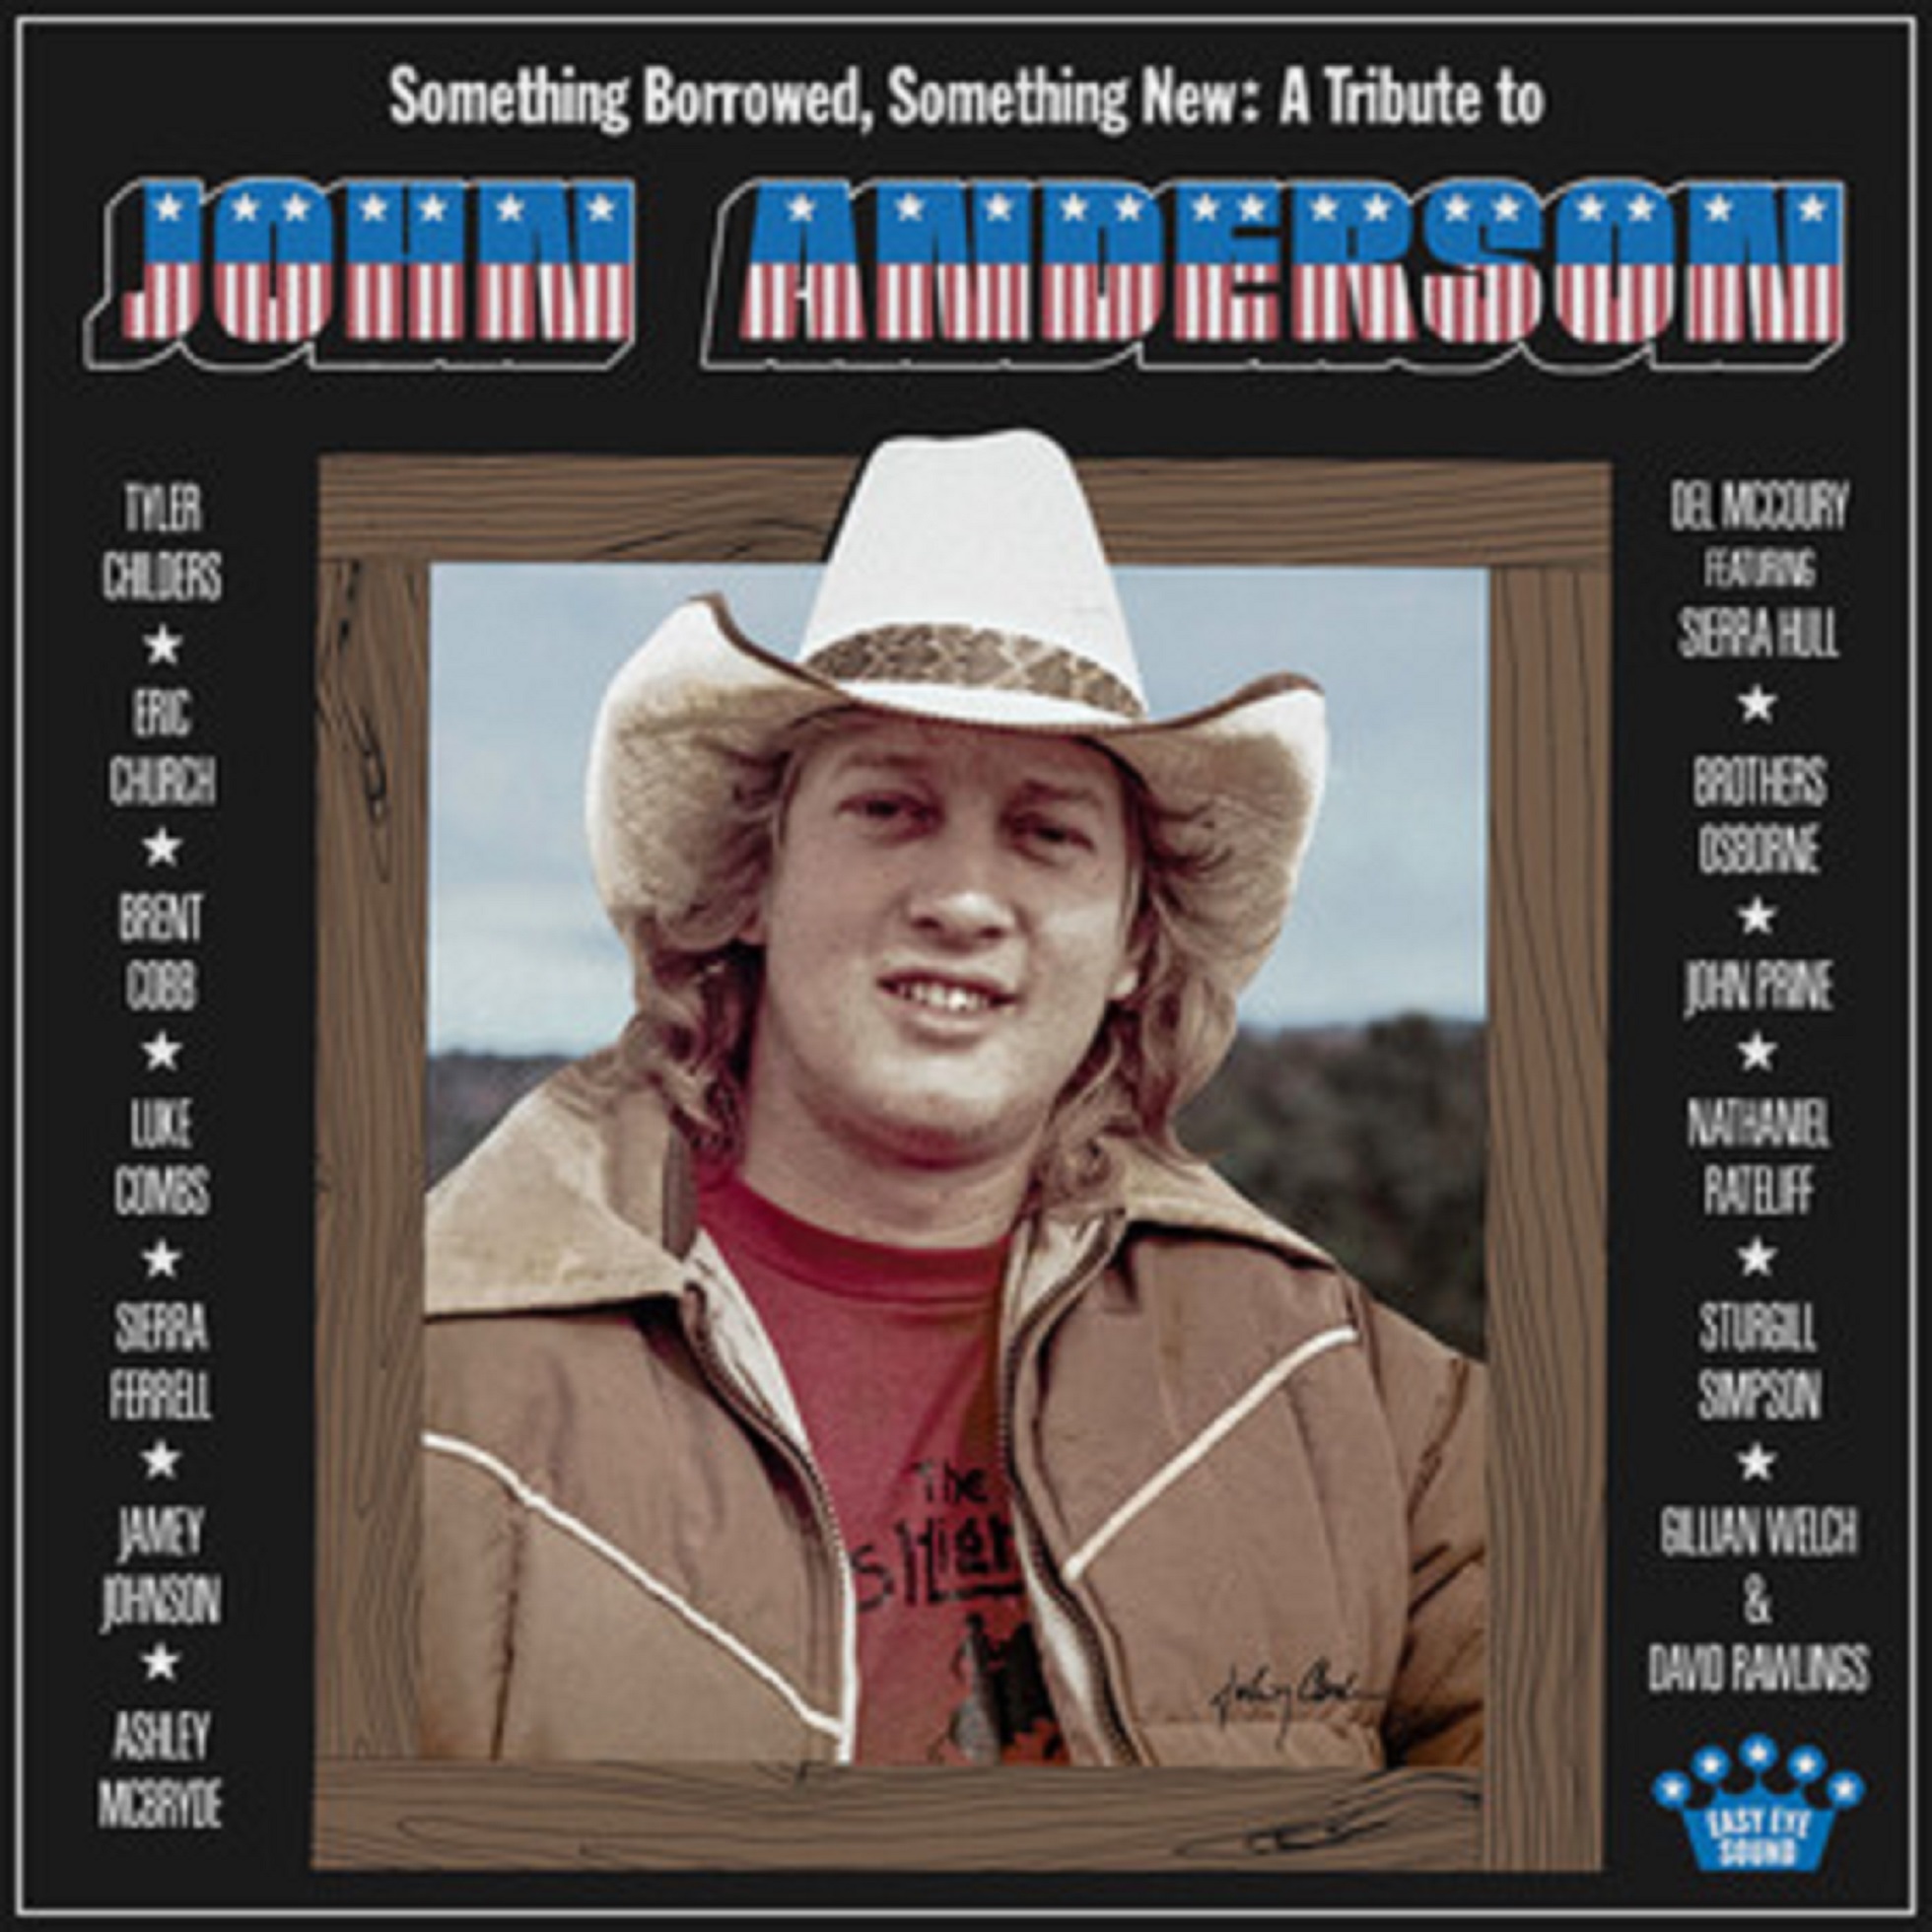 "Something Borrowed, Something New: A Tribute to John Anderson" out now